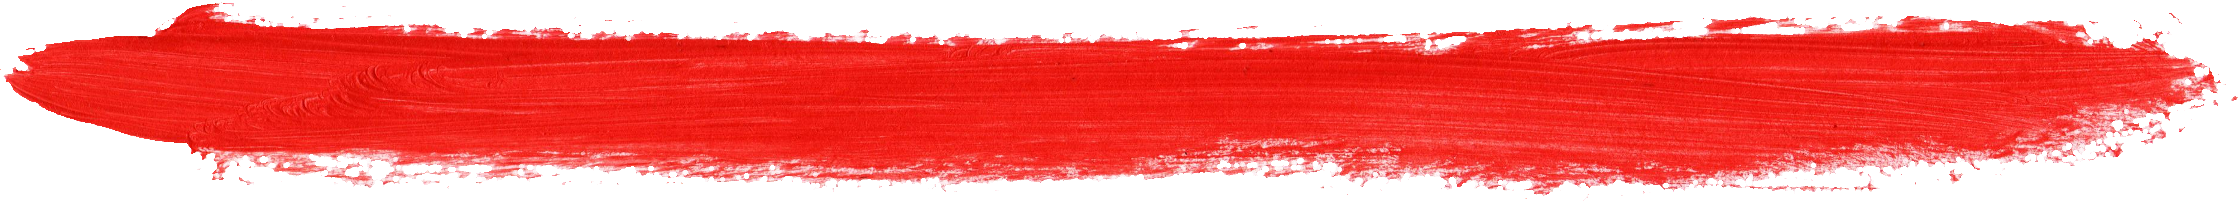 red-paint-brush-stroke-58.png